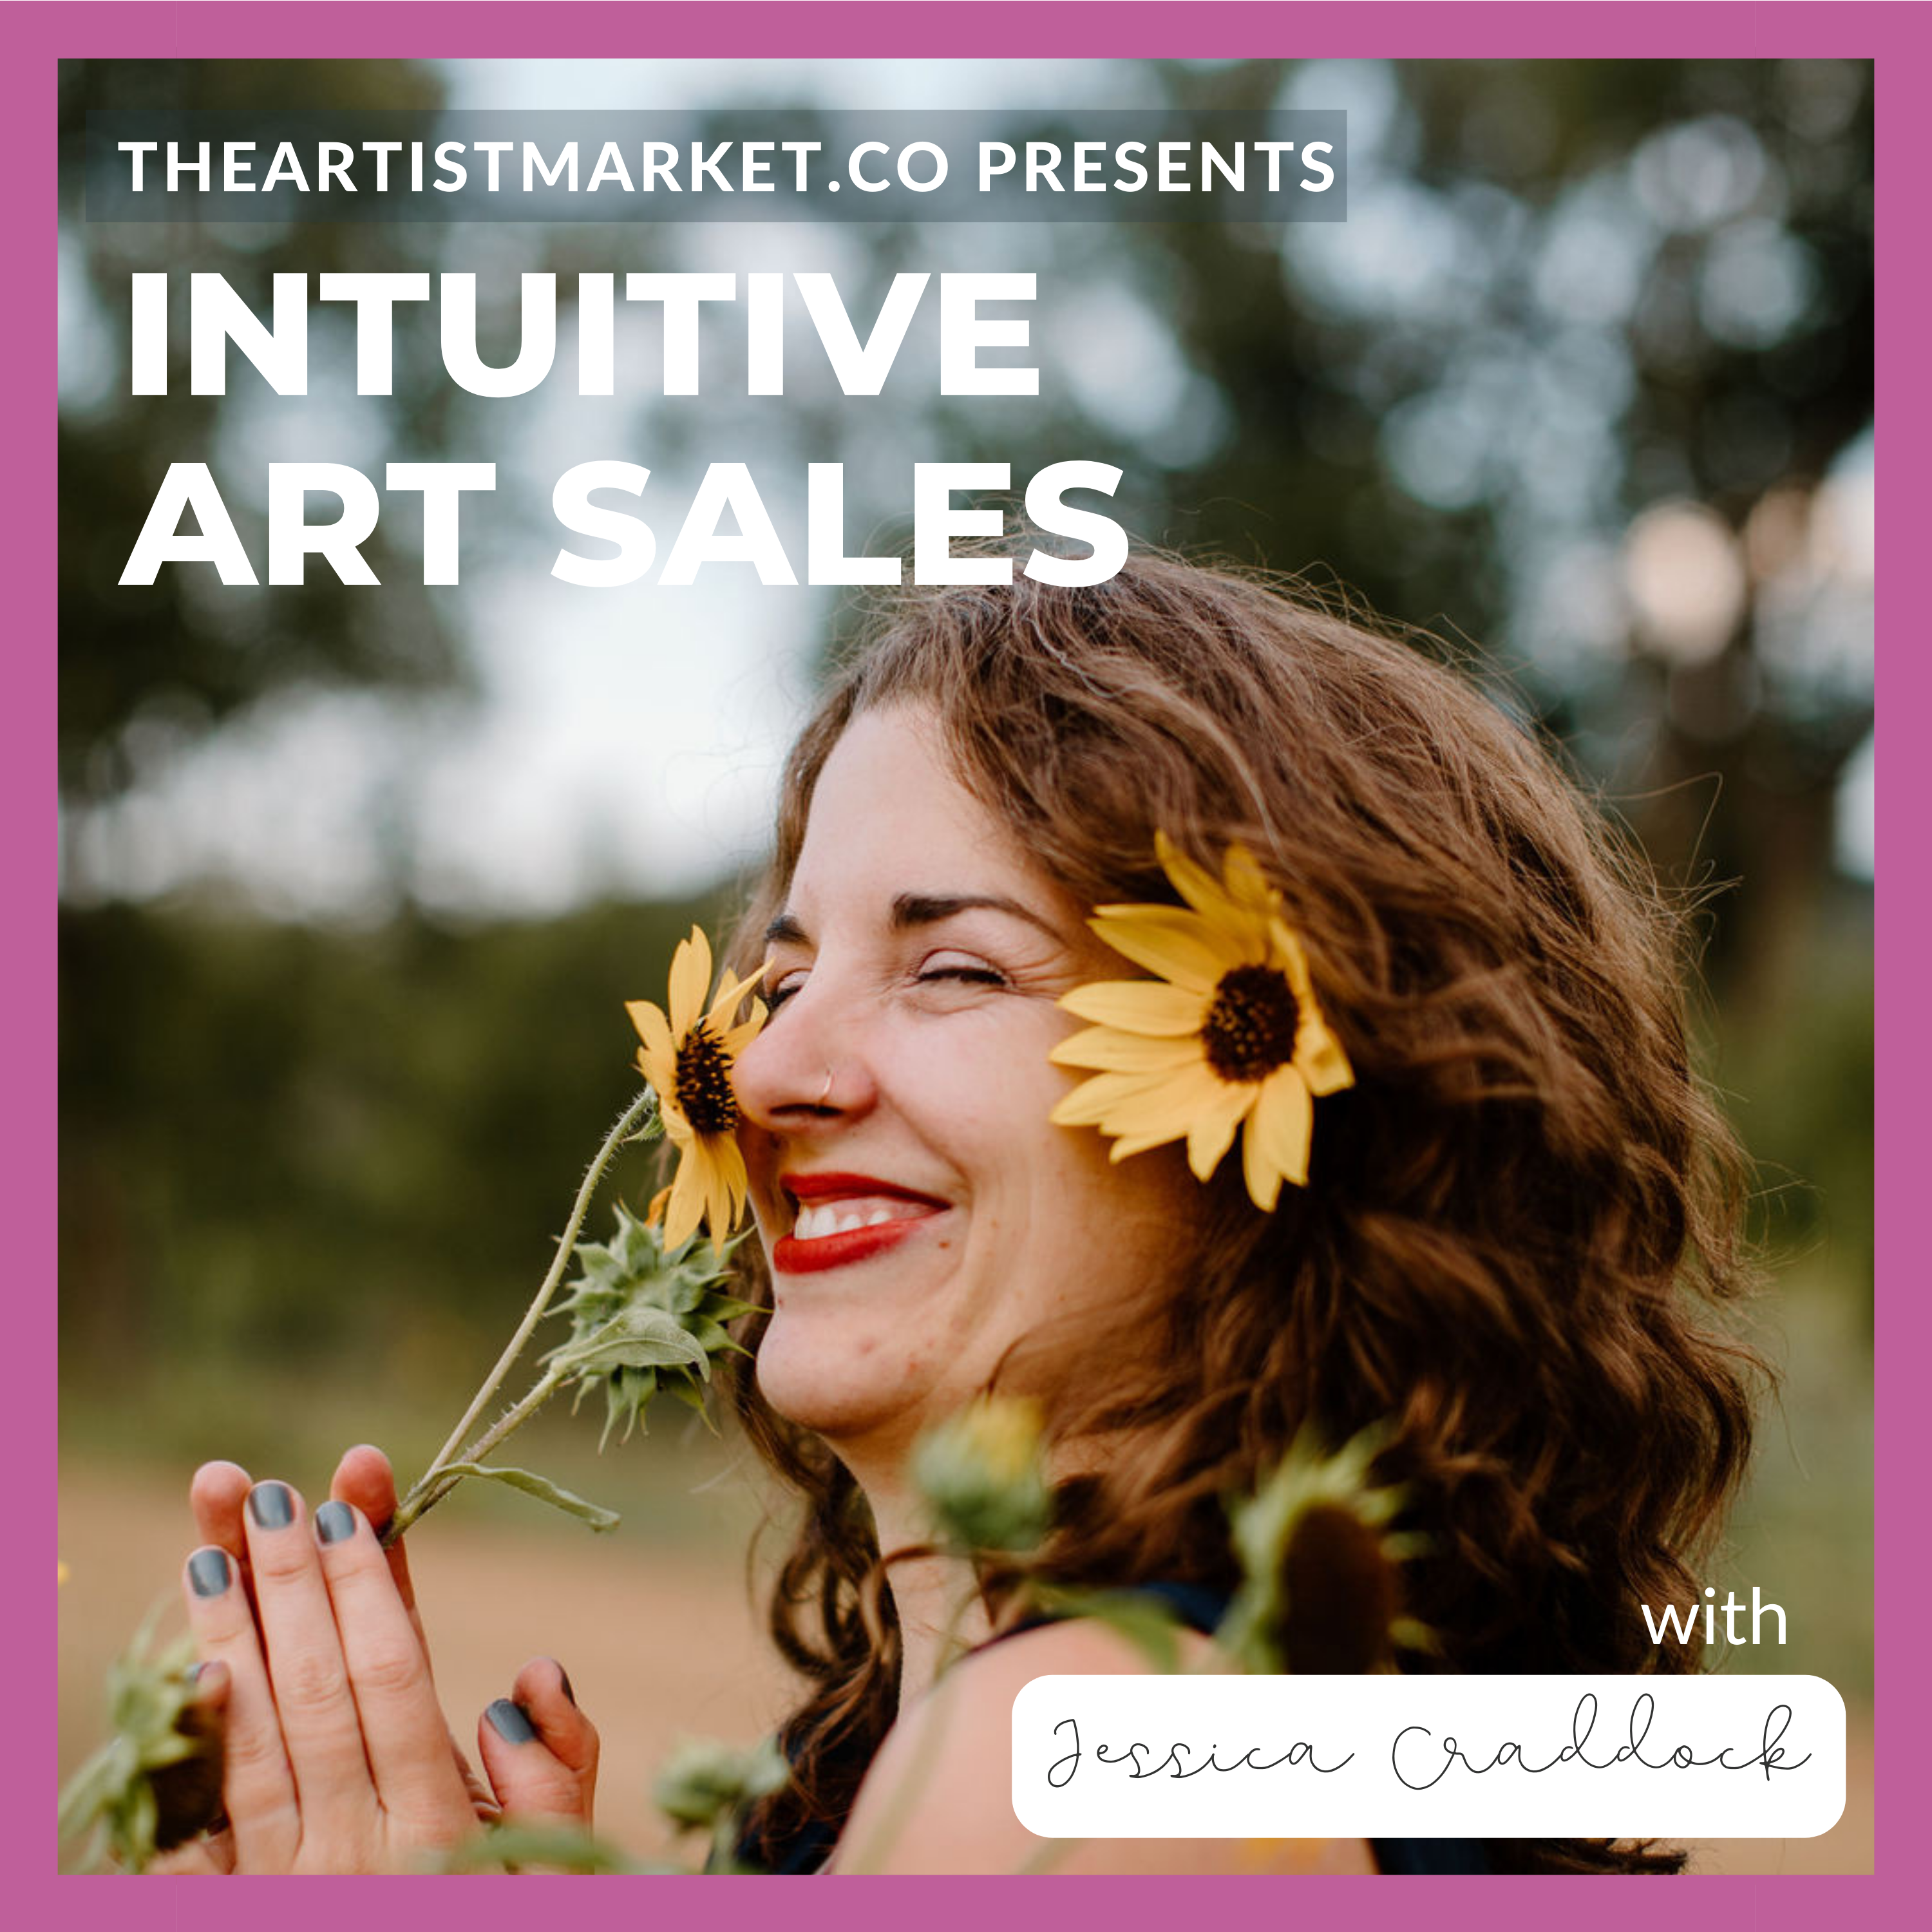 "What's the best way to generate more income from my artwork?" - Samantha Groom E73